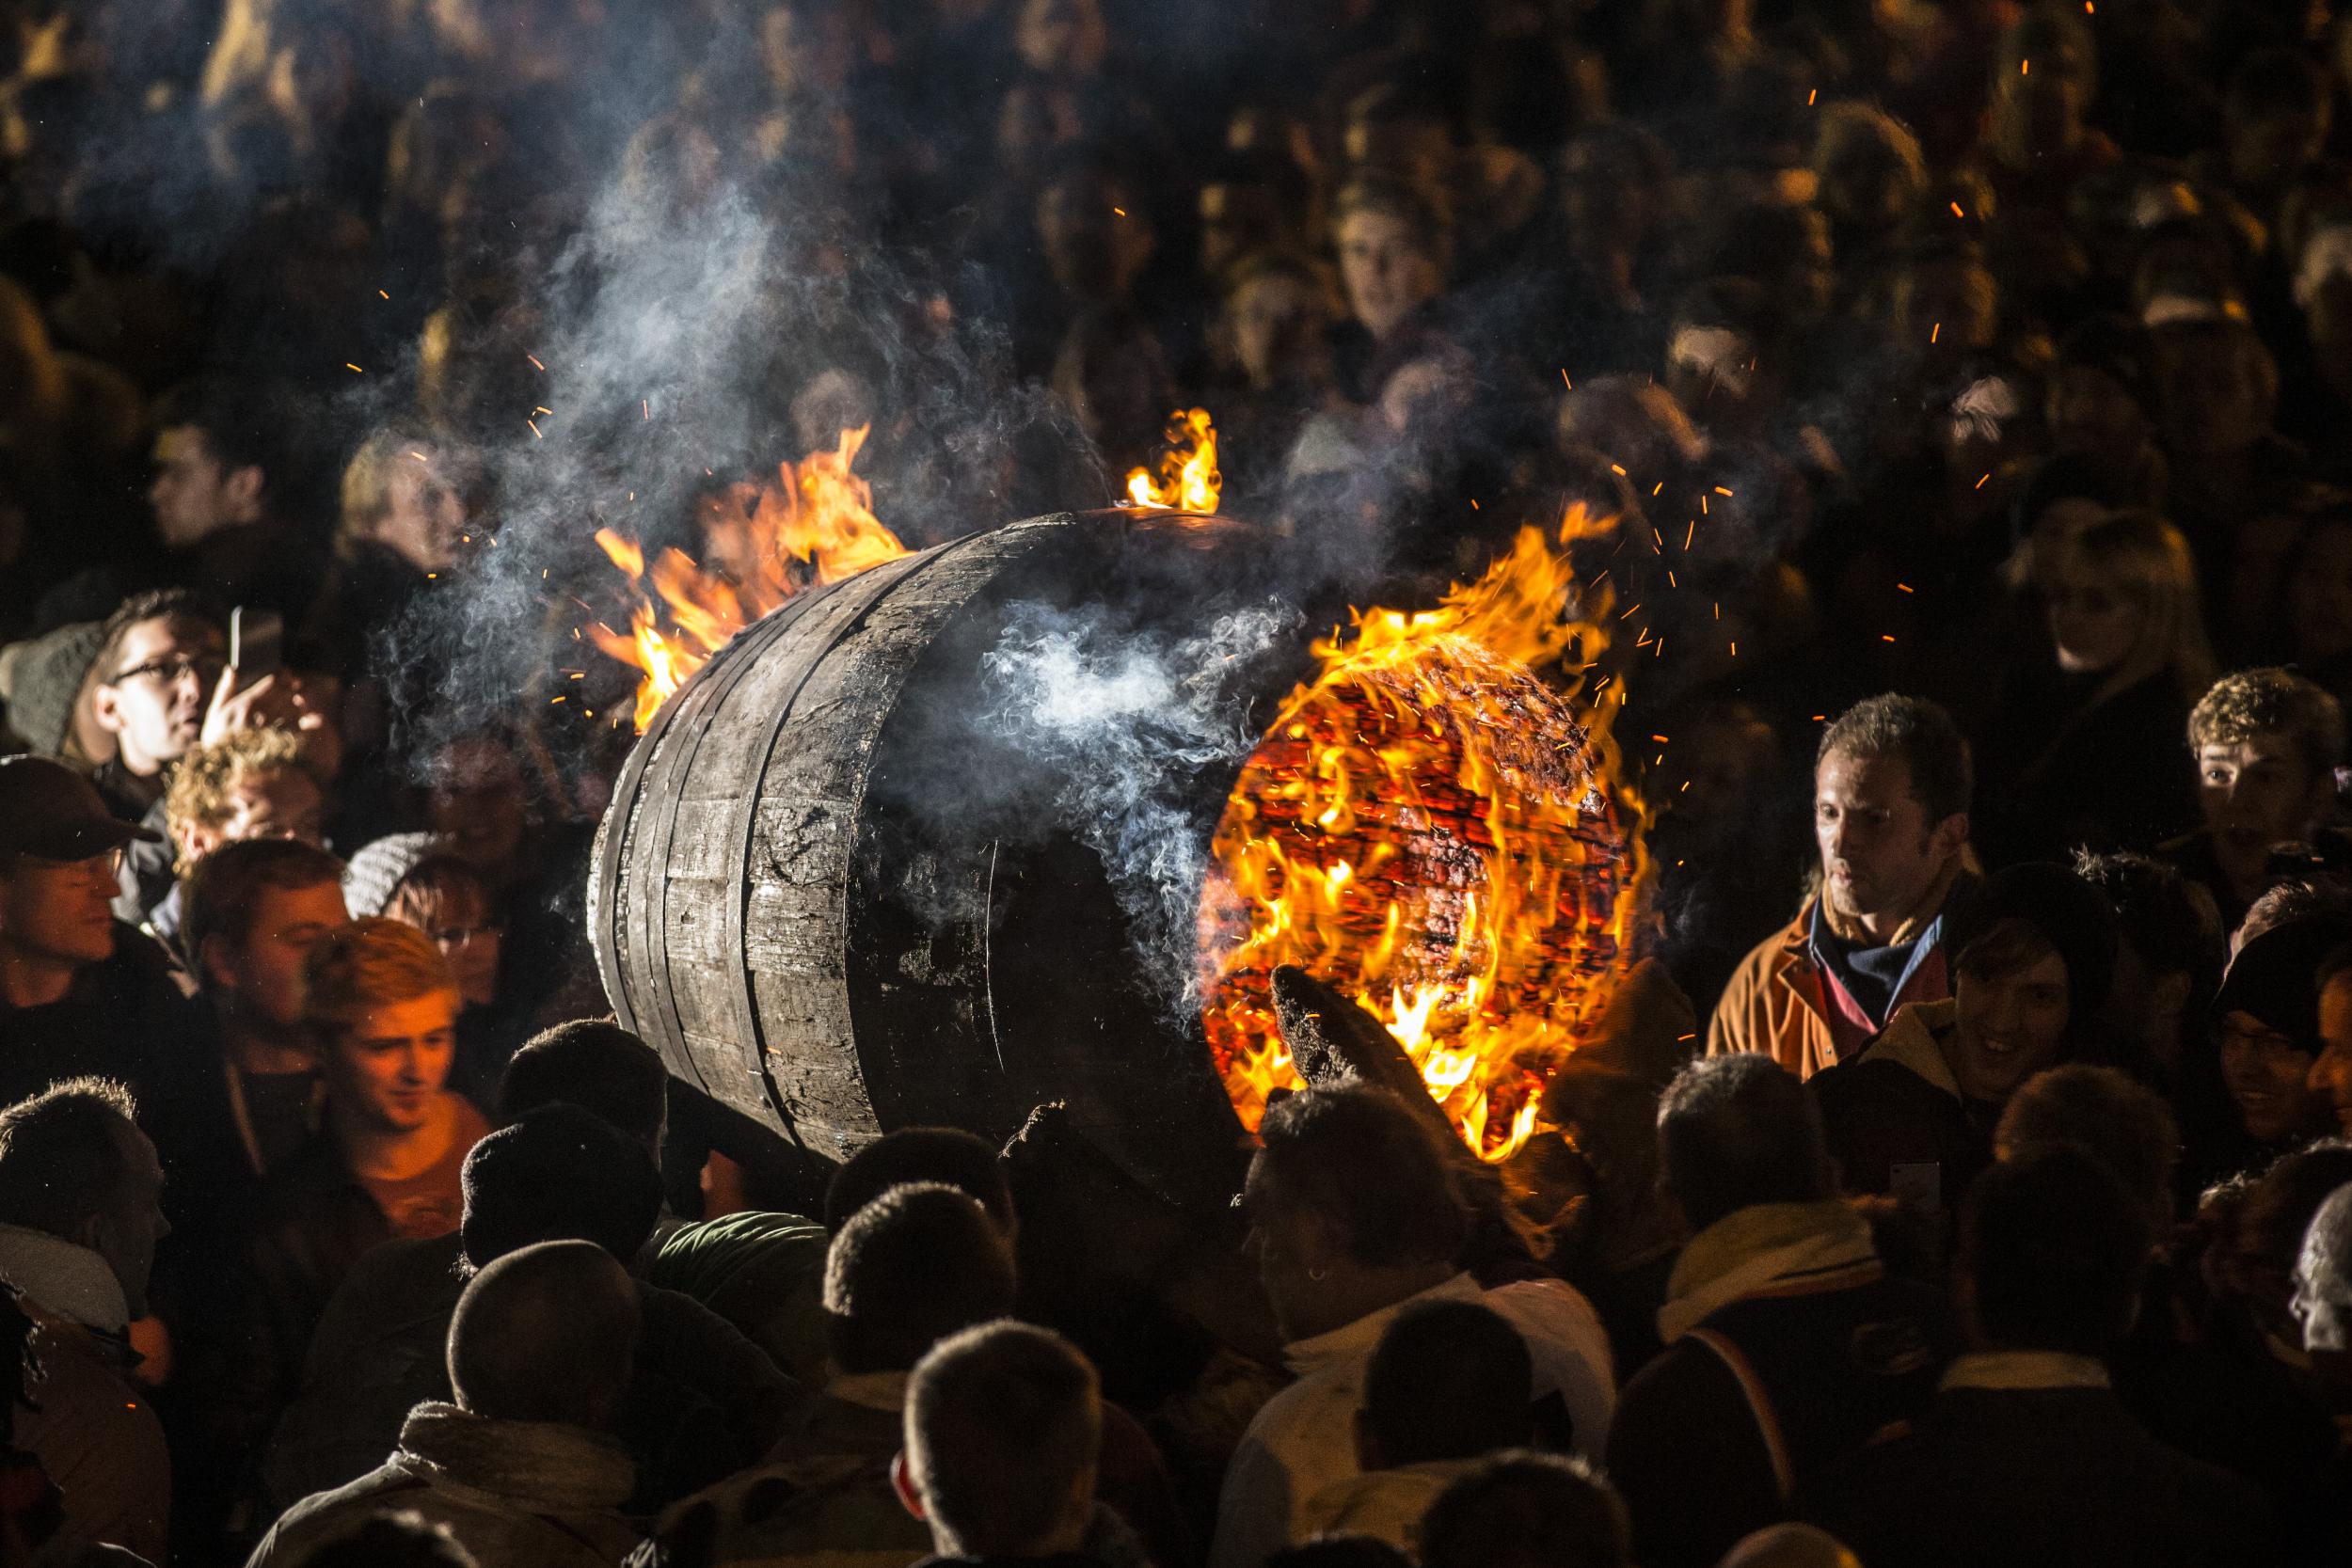 Flaming barrels carried through the streets in Ottery St Mary